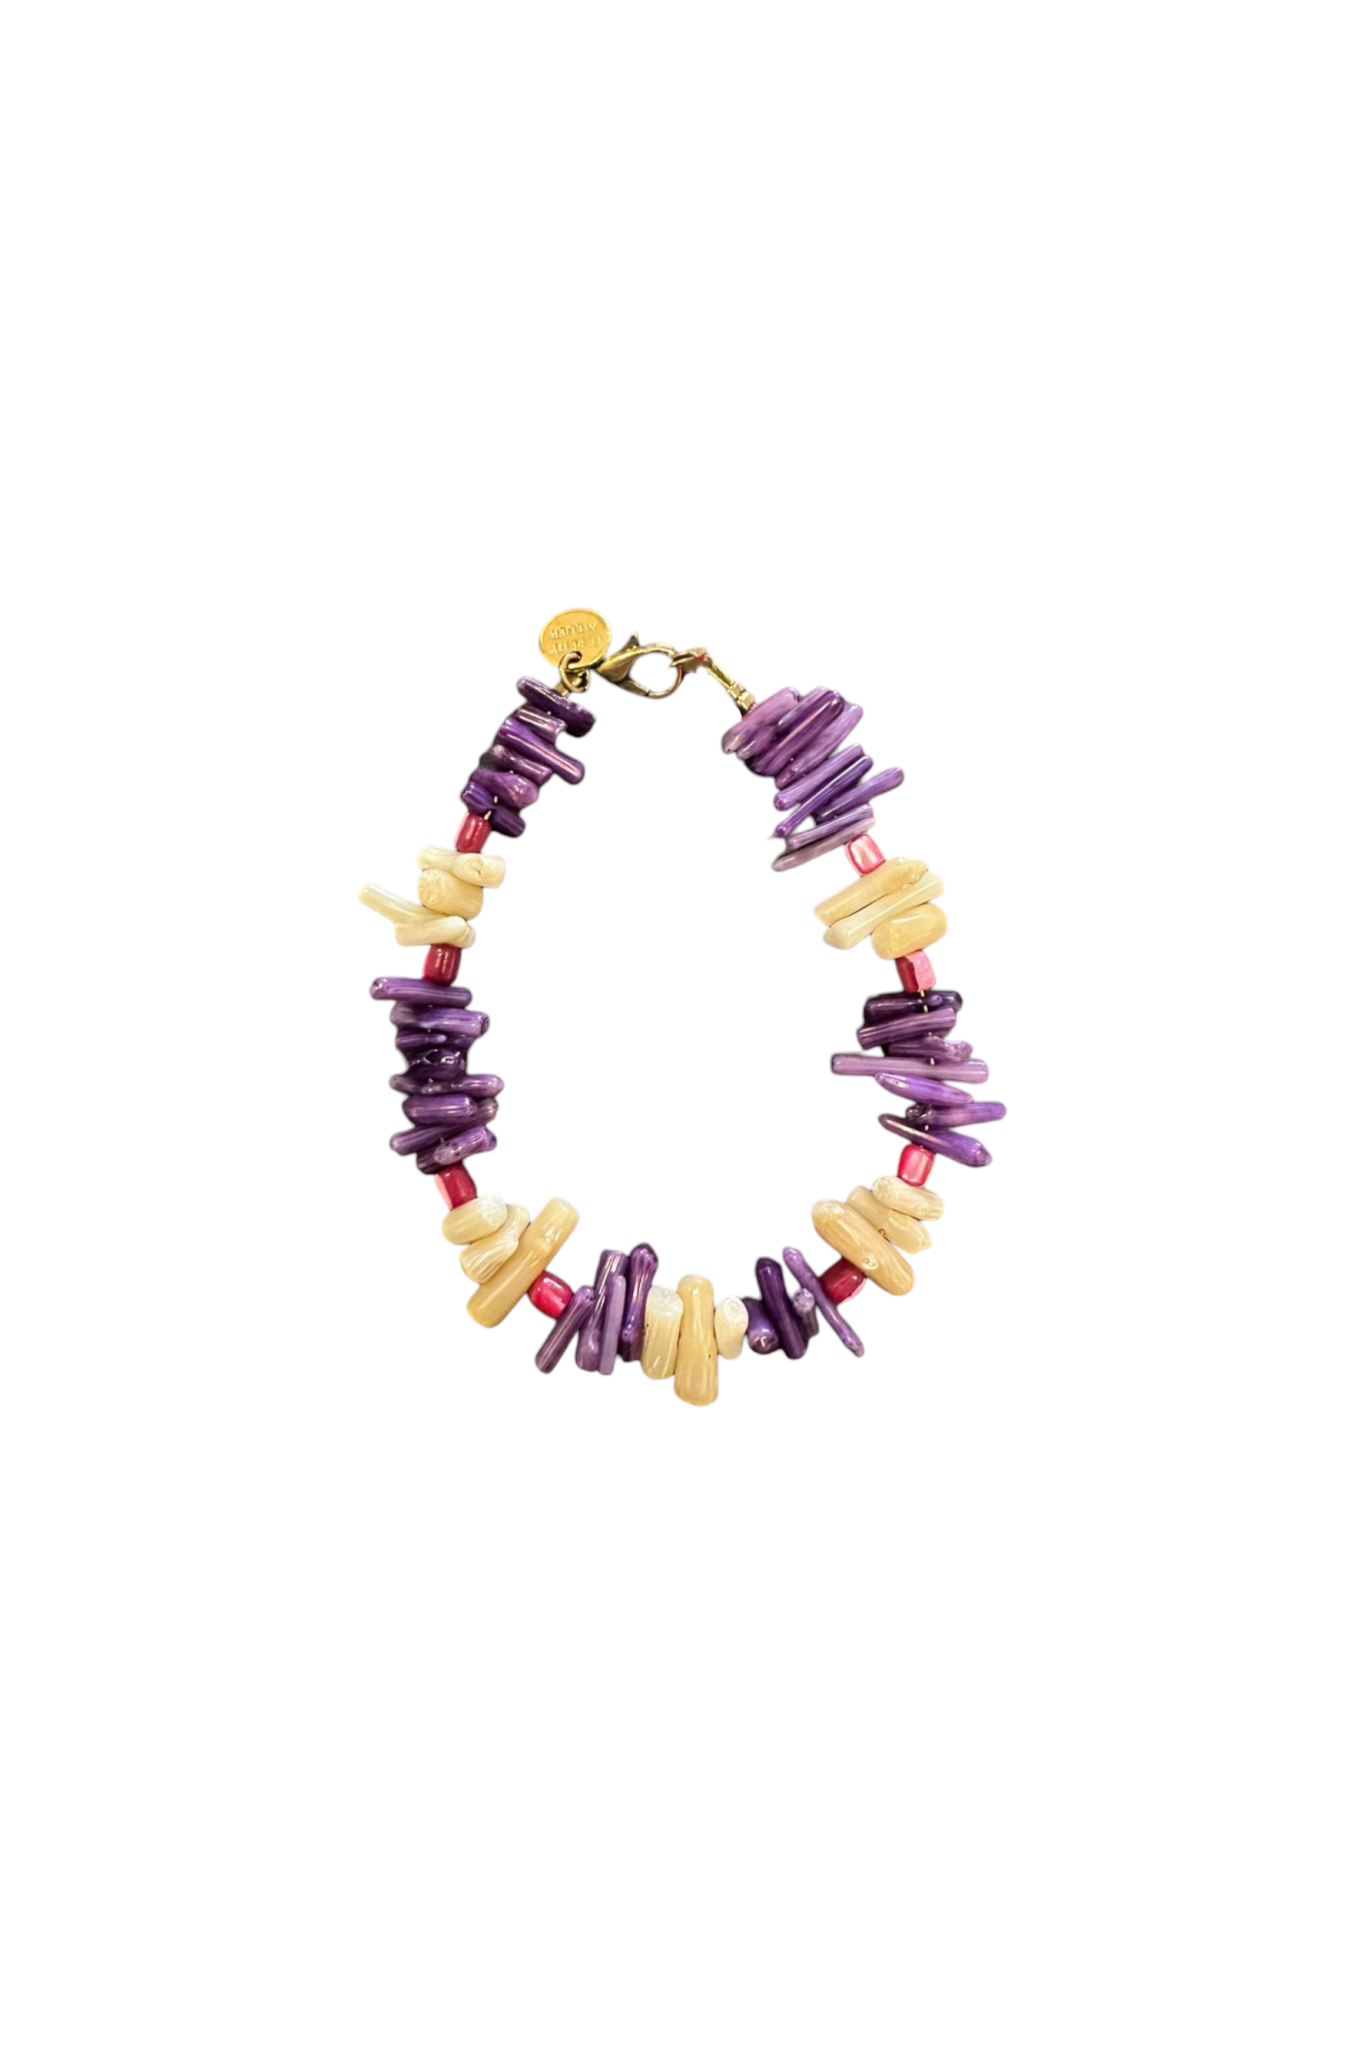 Le Petit Atelier Bracelet Sea Shell with Glass - Radiant Orchid - RUM Amsterdam